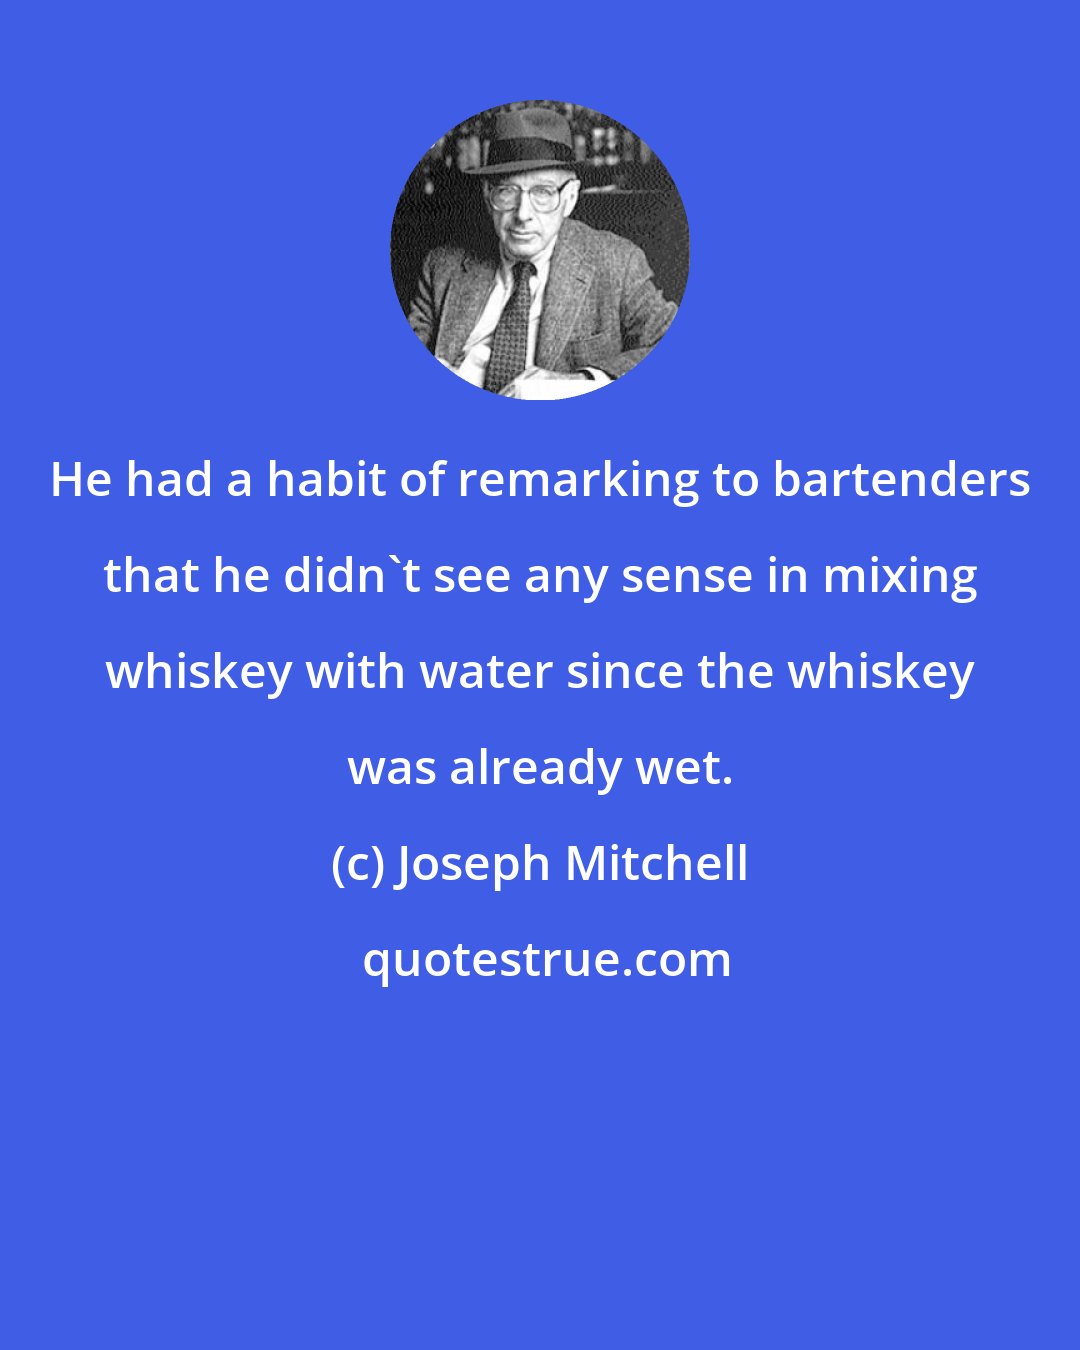 Joseph Mitchell: He had a habit of remarking to bartenders that he didn't see any sense in mixing whiskey with water since the whiskey was already wet.